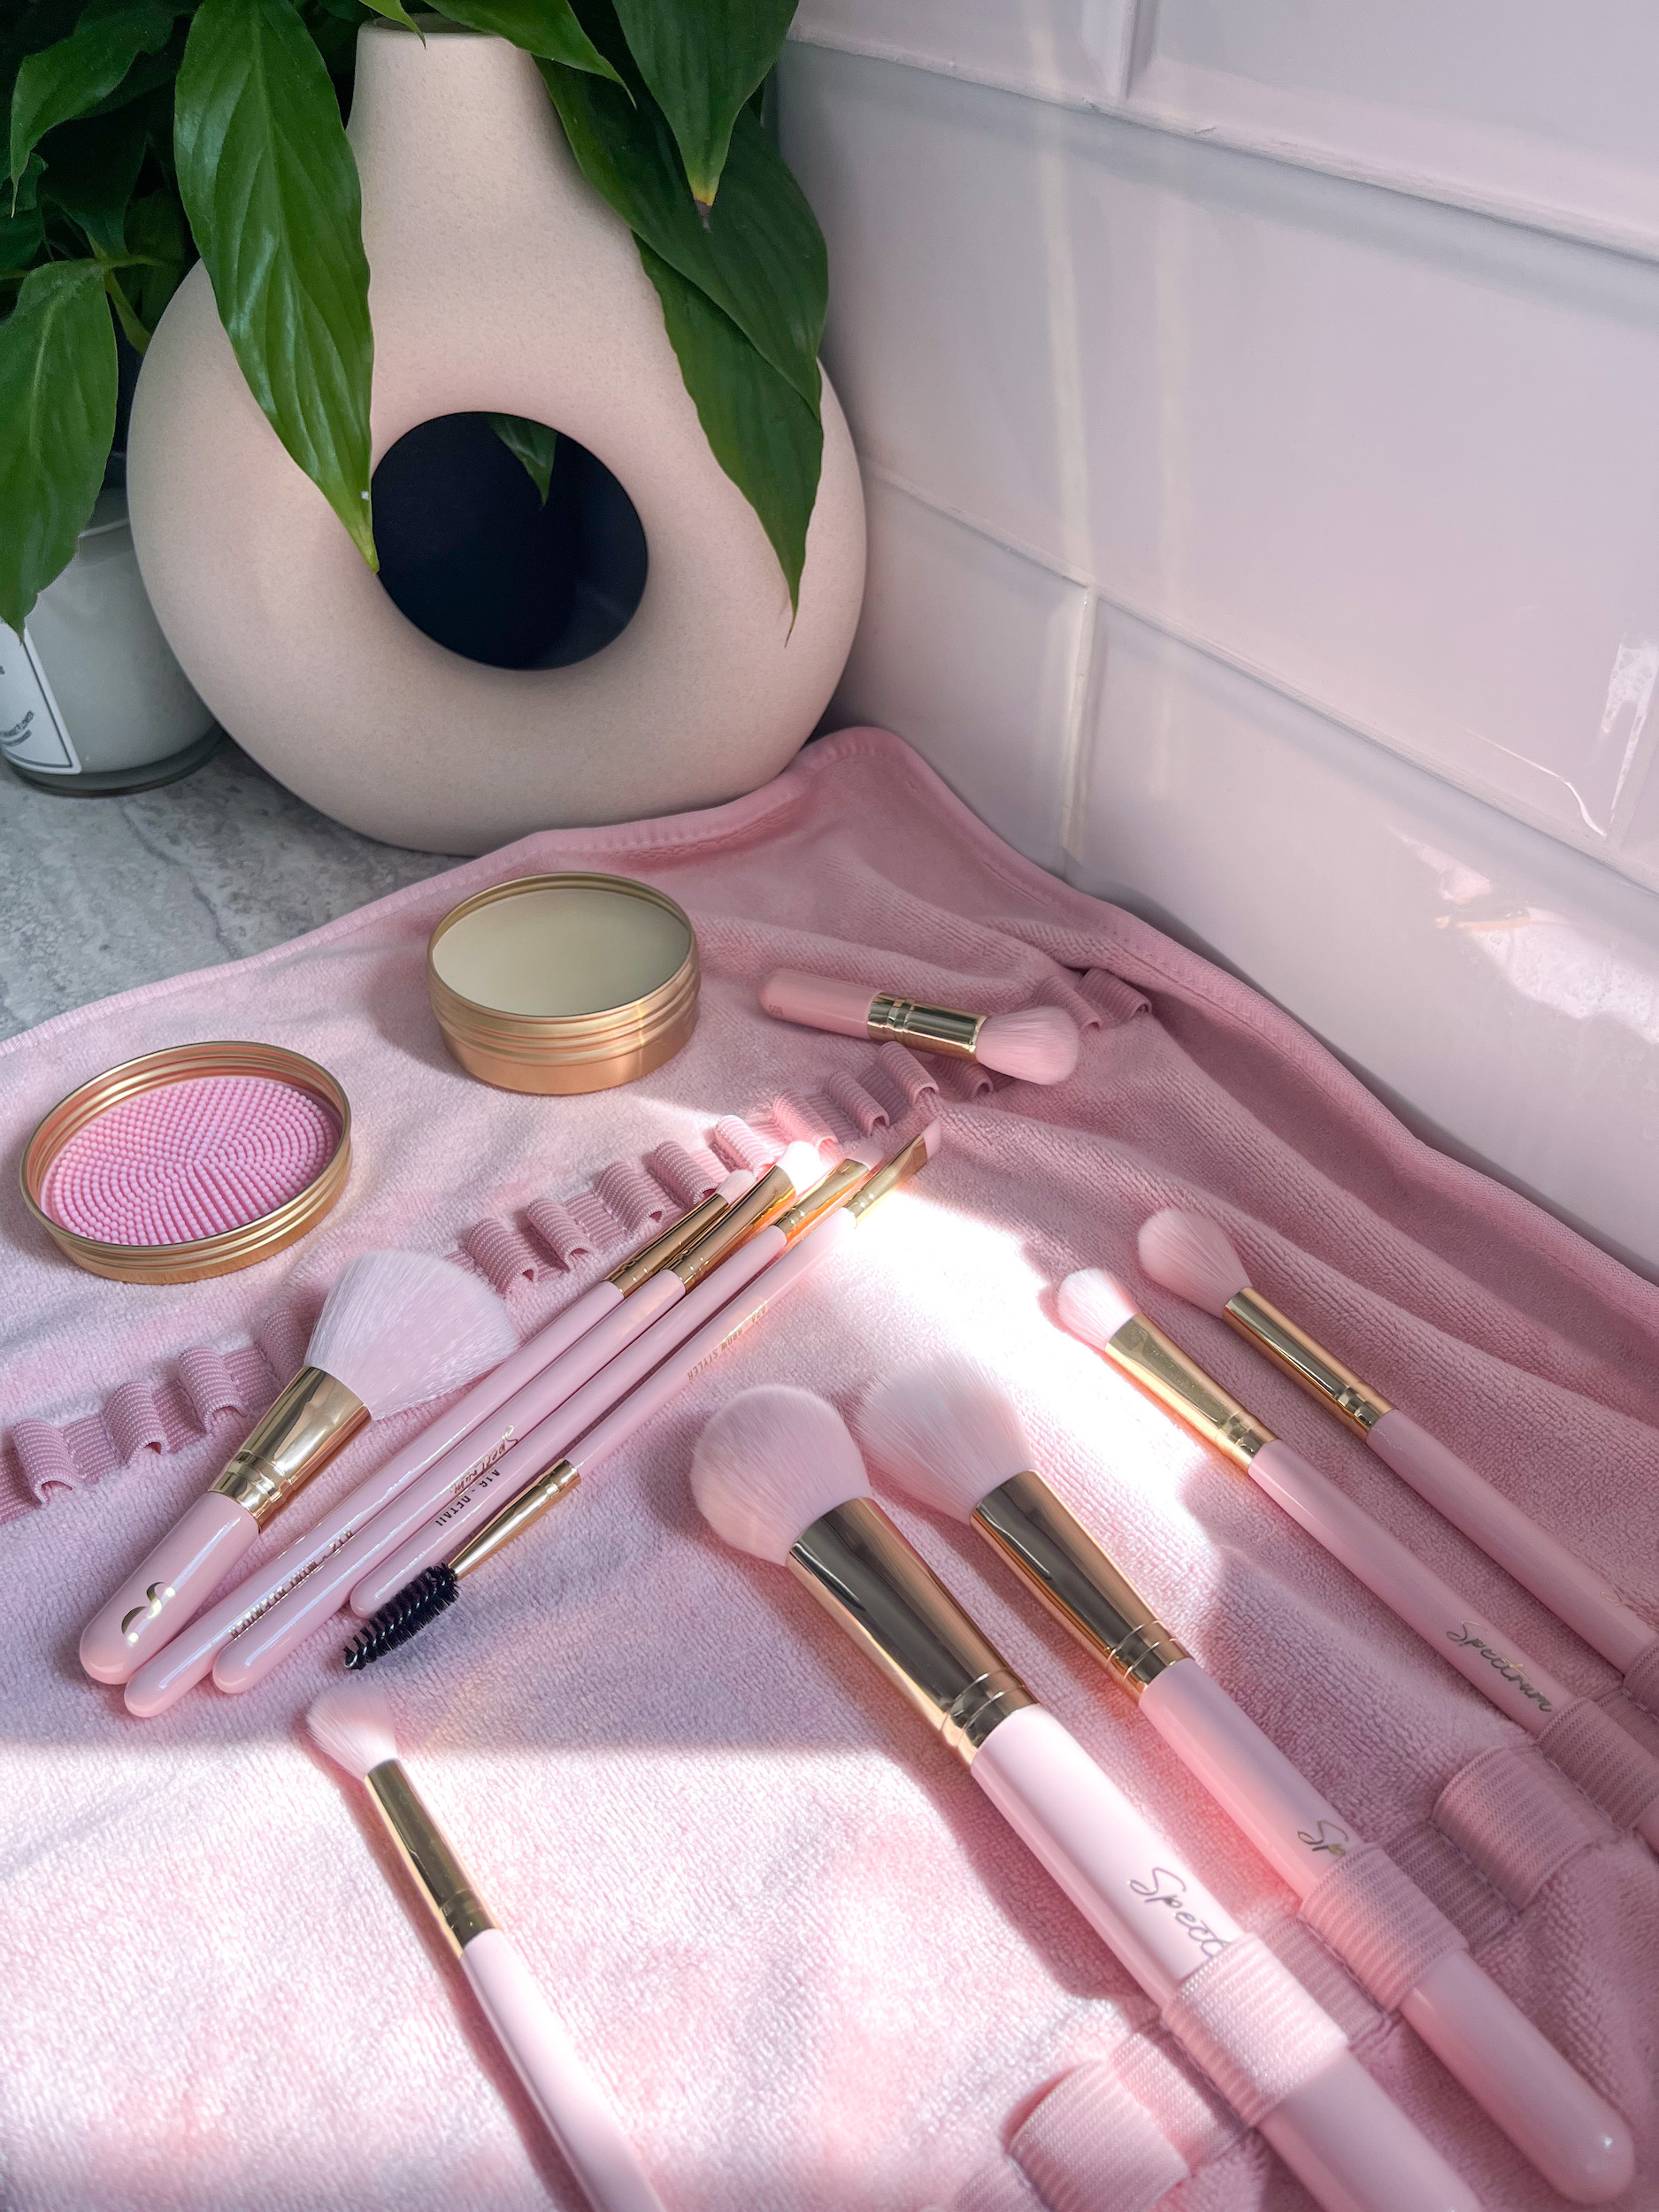 Spectrum's Brush Laundrette The Simplest Way To Clean Your Makeup Brushes The Summer Study